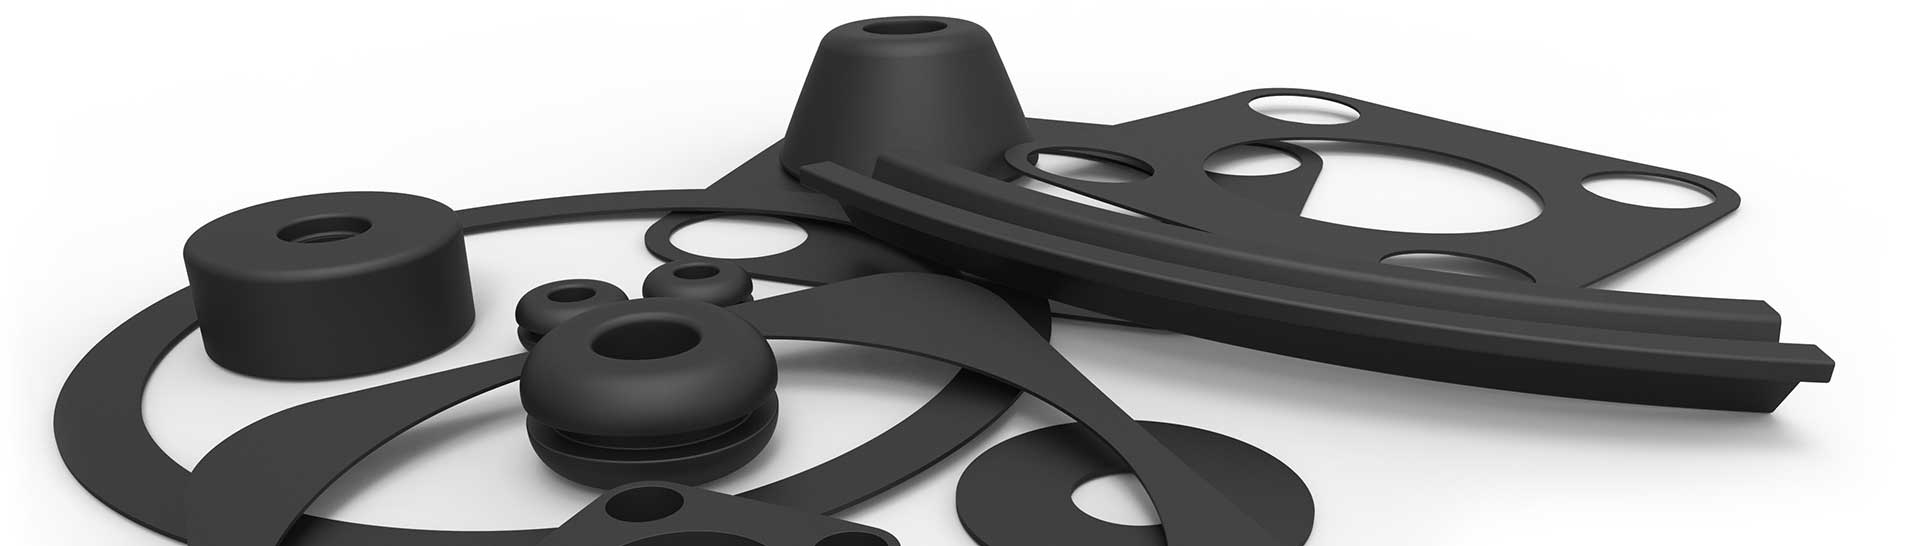 This is an image of black rubber gaskets and seals